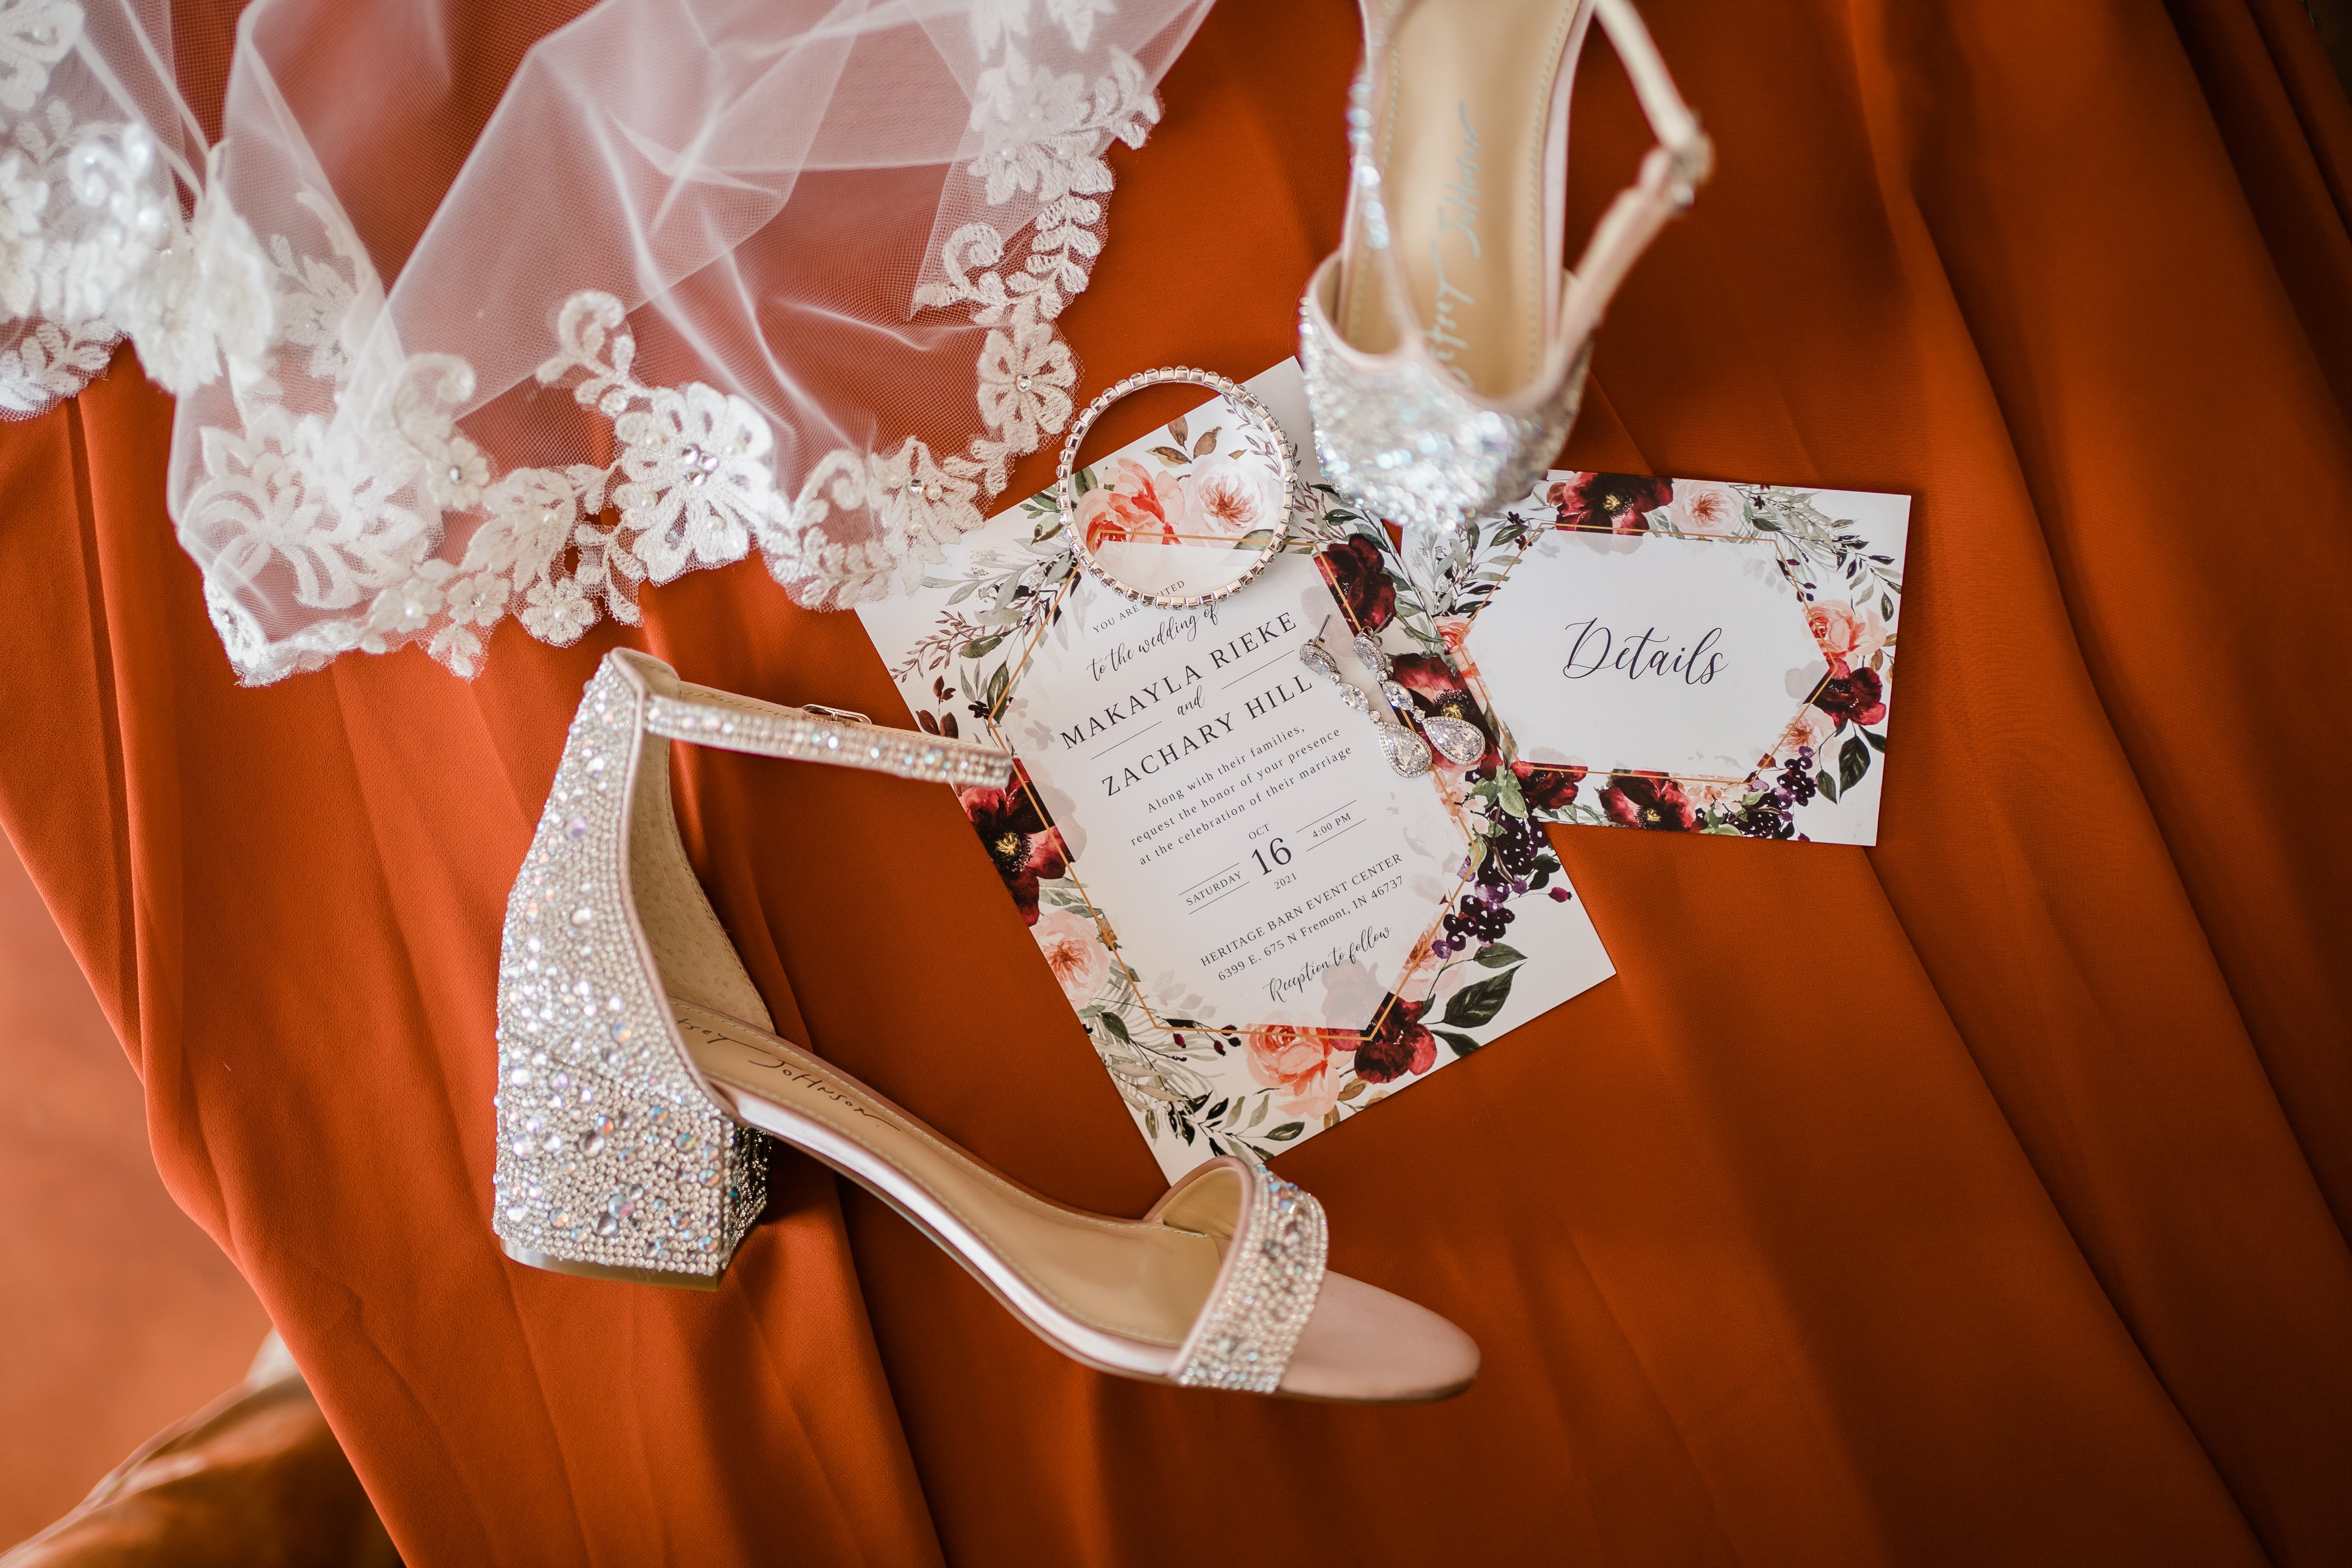 wedding veil, brides shoes and wedding invitations on top of a burnt orange fabric